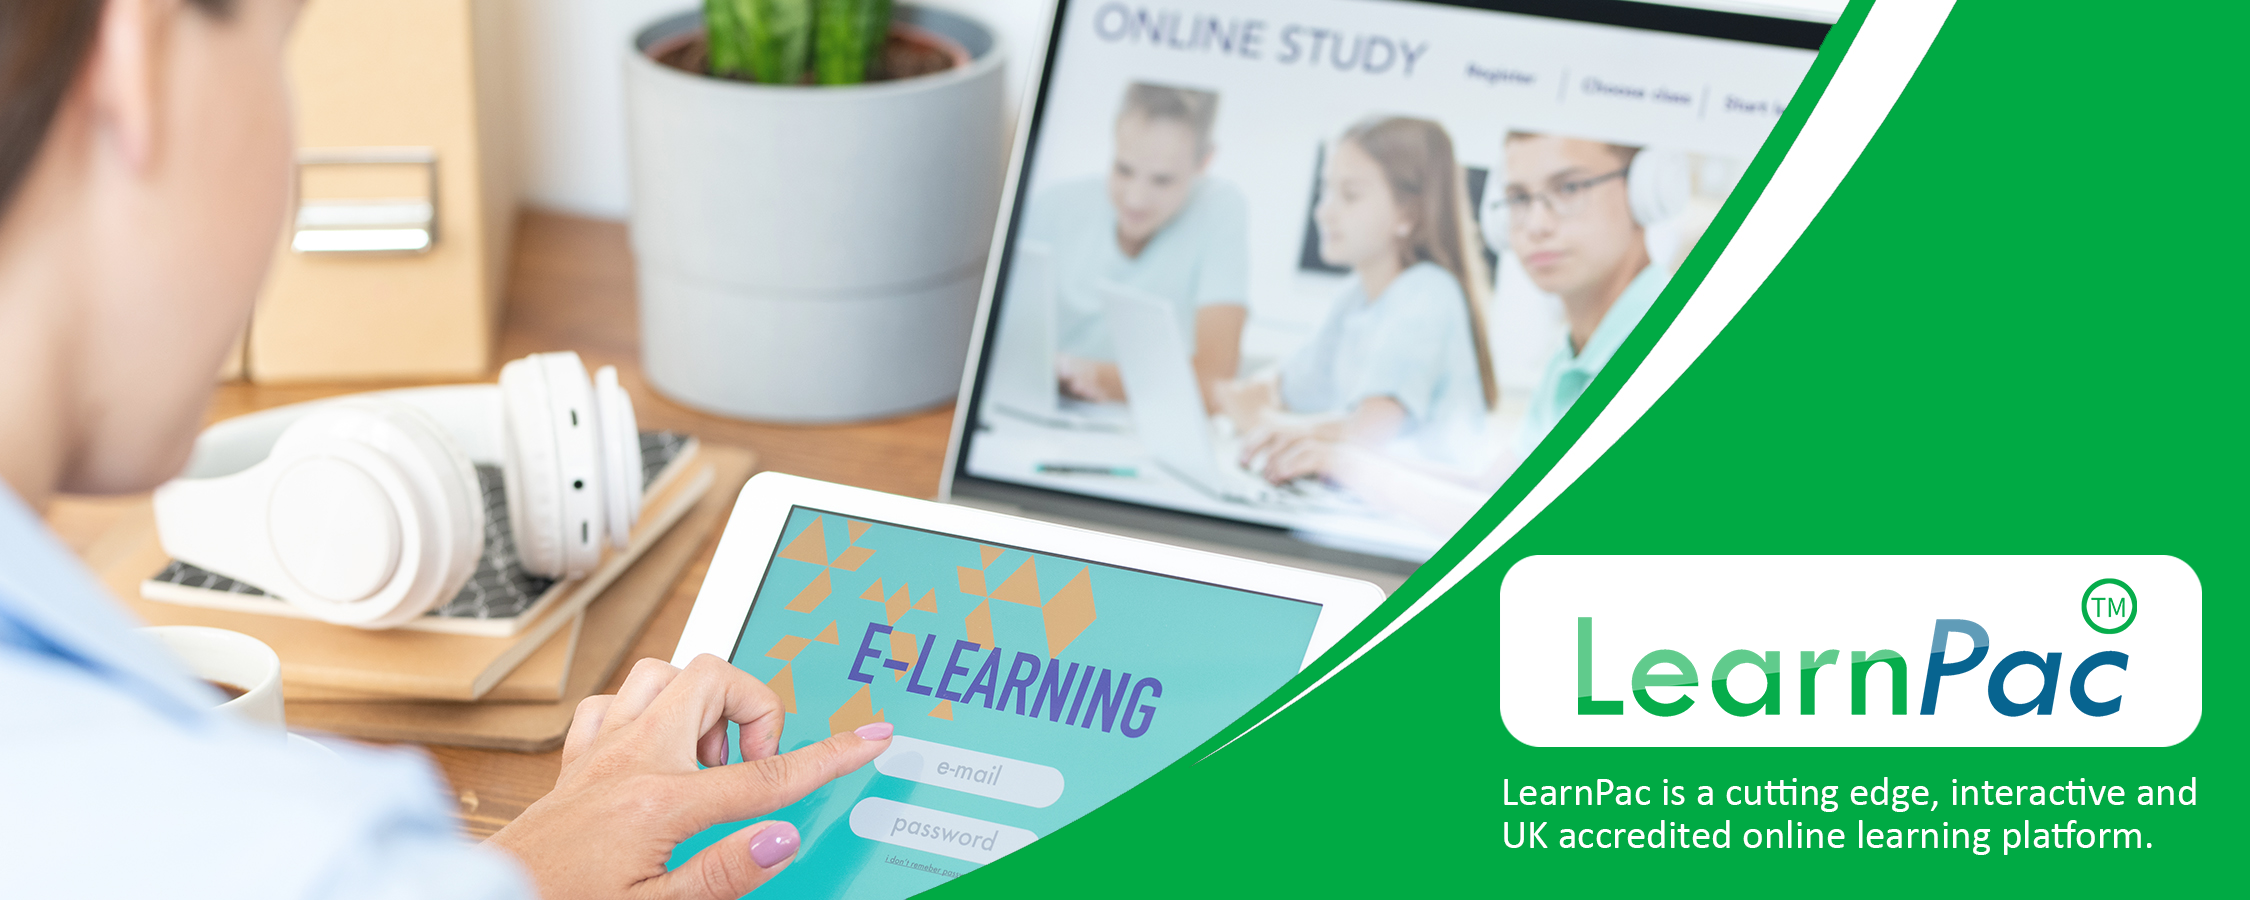 Care Certificate Standard 11 - Safeguarding Children - E-Learning Course - LearnPac Systems UK -